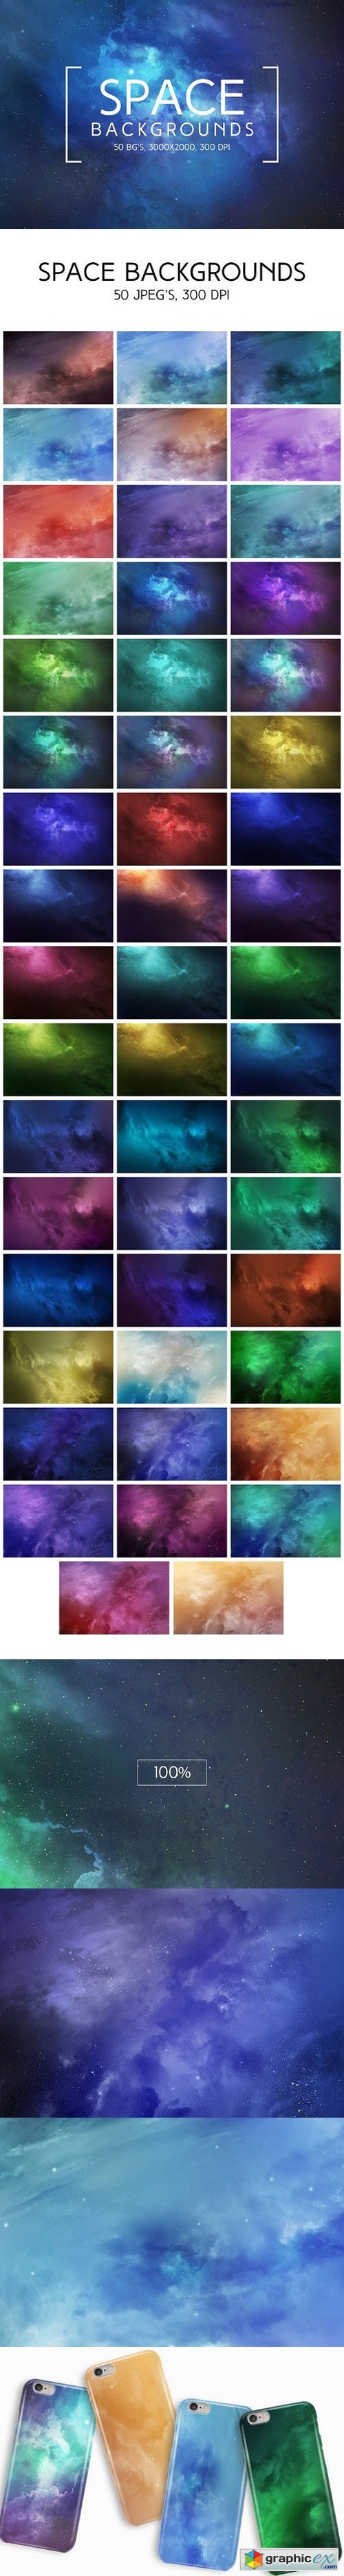 50 Space Backgrounds